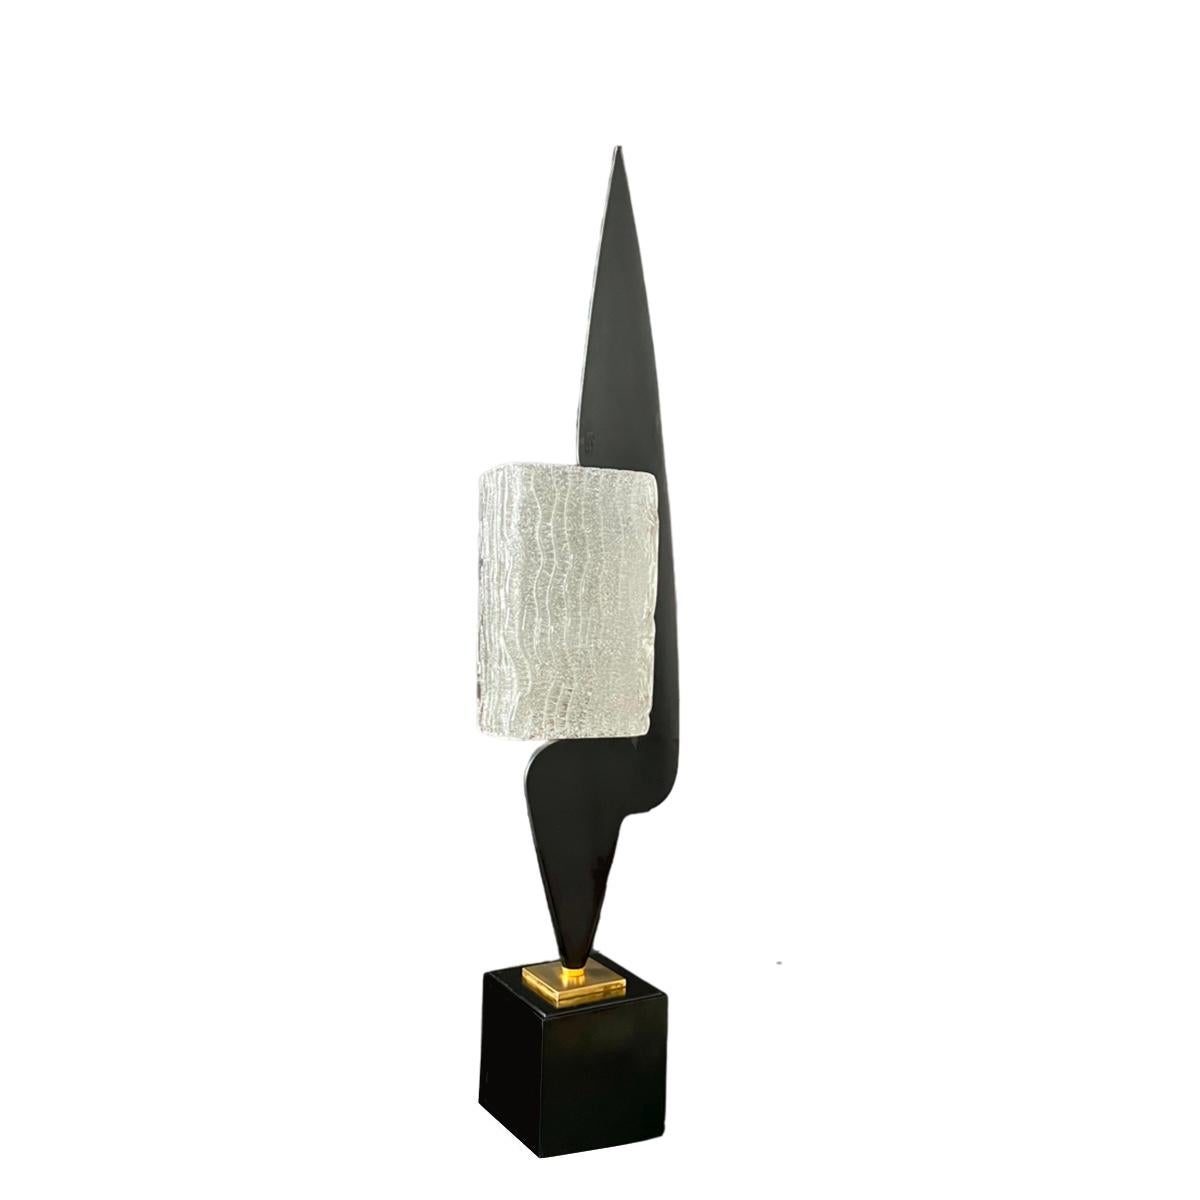 Rare Arlus black lacquered wood lamp. A cubic black lacquered wooden base supports a small square brass pedestal onto which an elongated form of the same material is fixed. A rectangular thick glass lampshade engraved with wave motifs fits into the